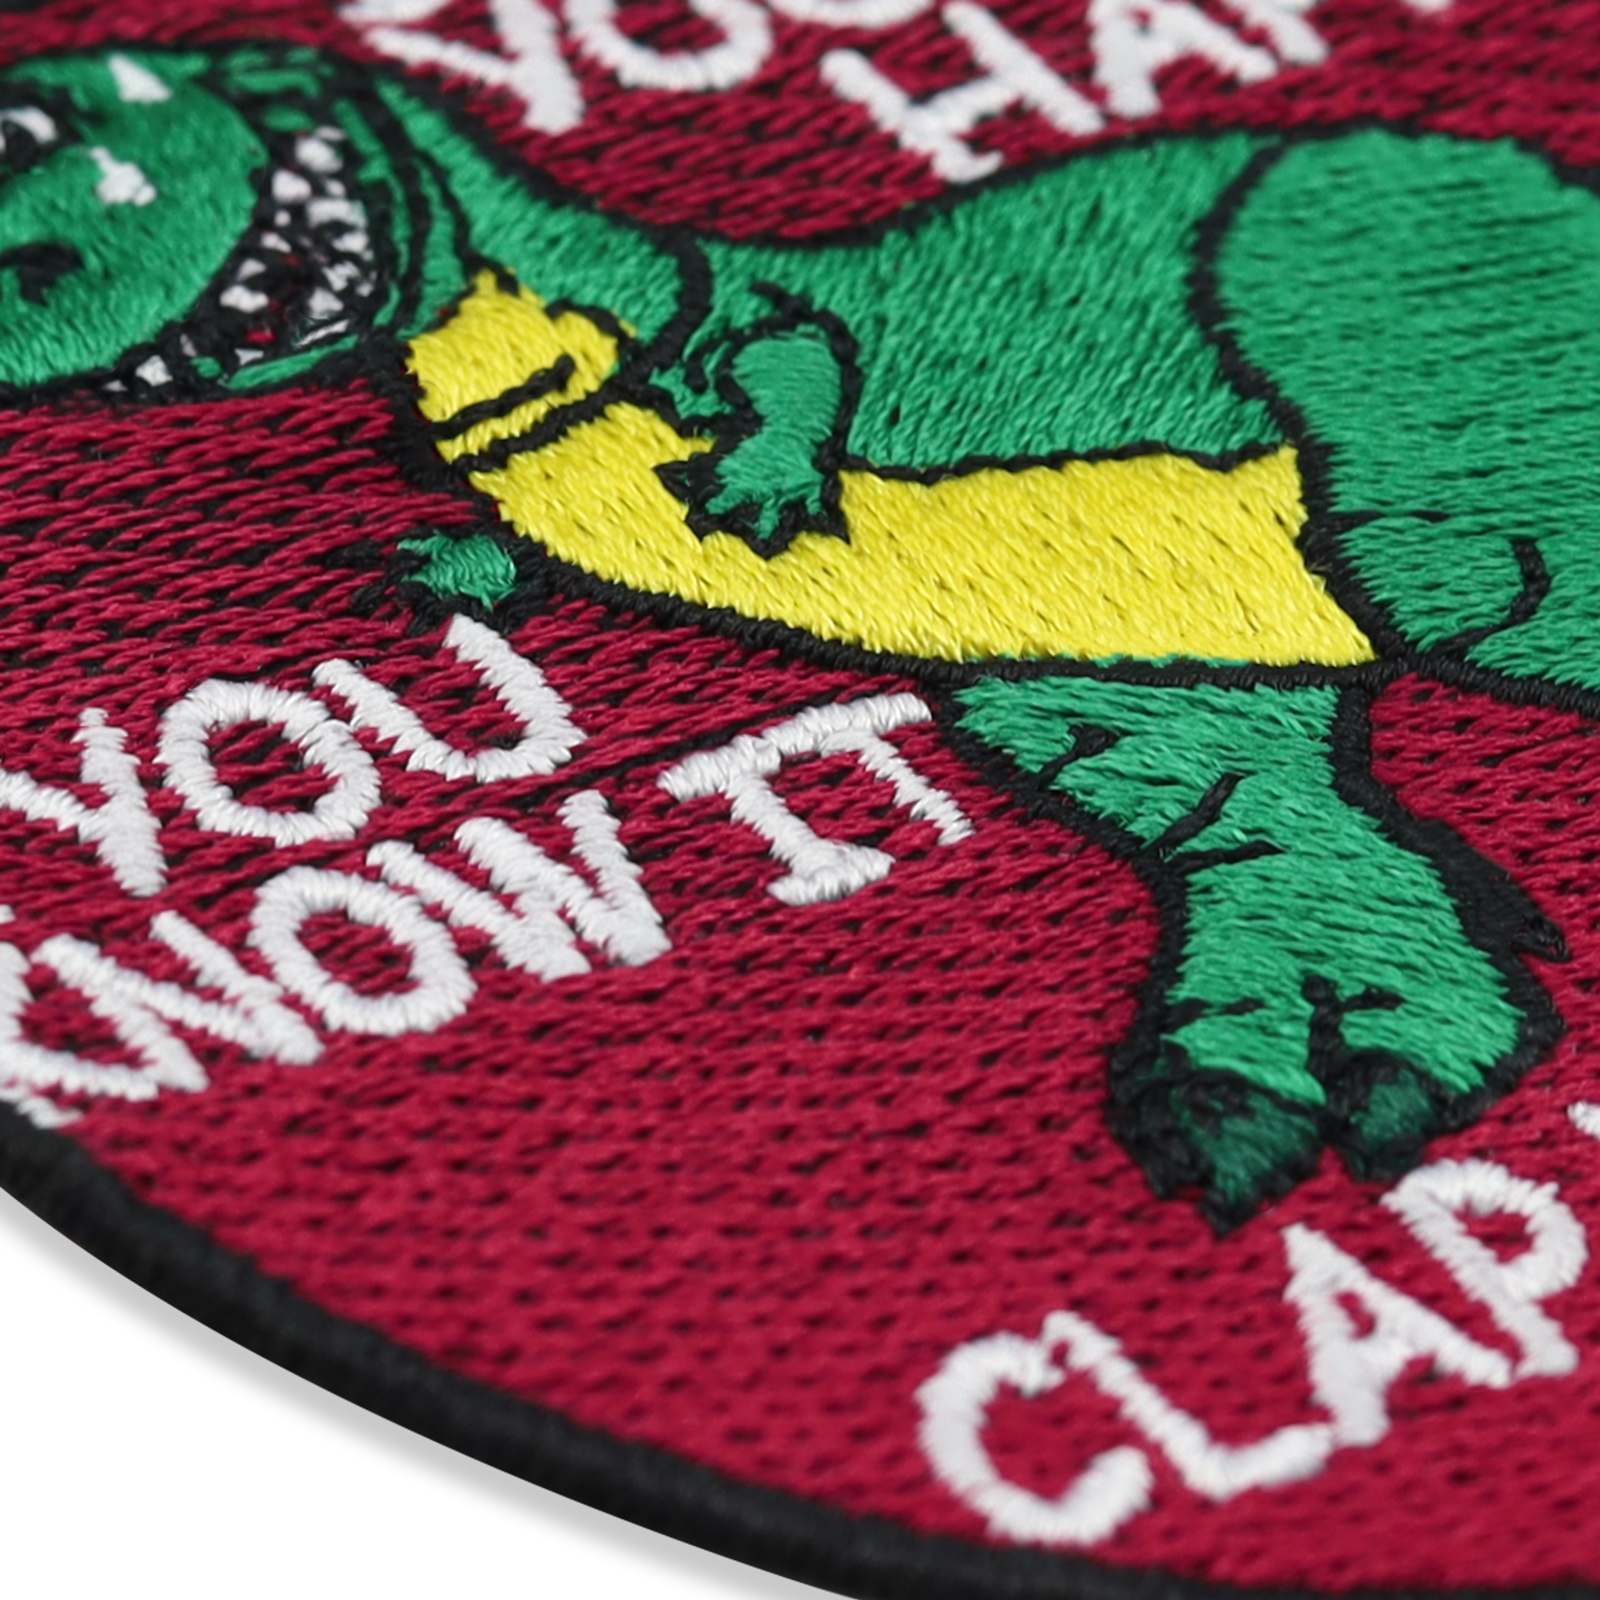 If you happy and you know it clap your ... Oh - Patch